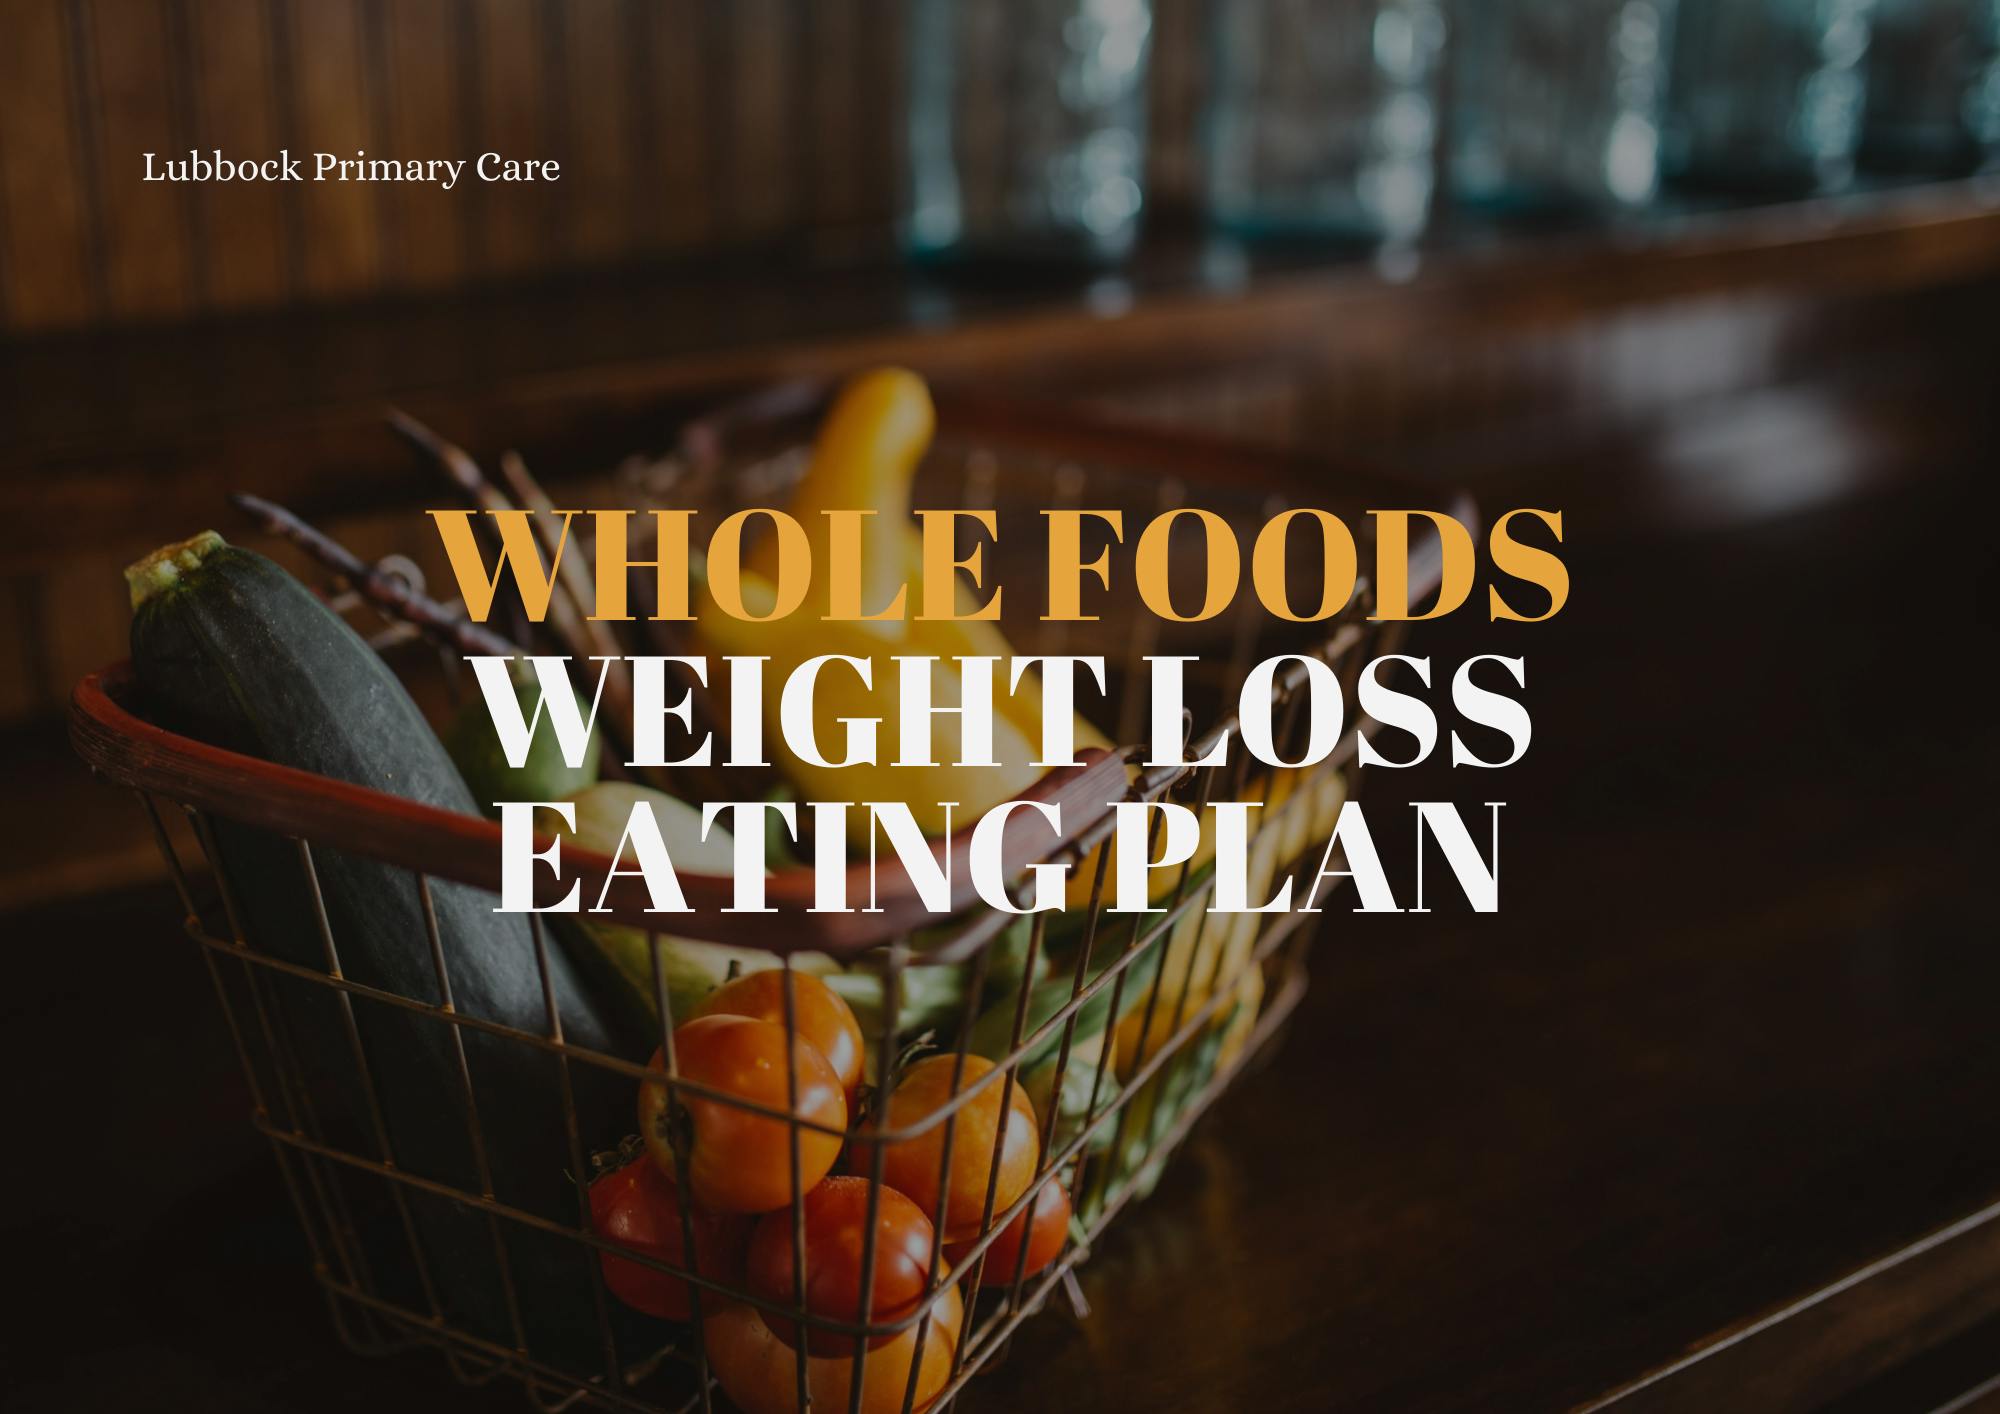 Whole Foods Weight Loss Eating Plan